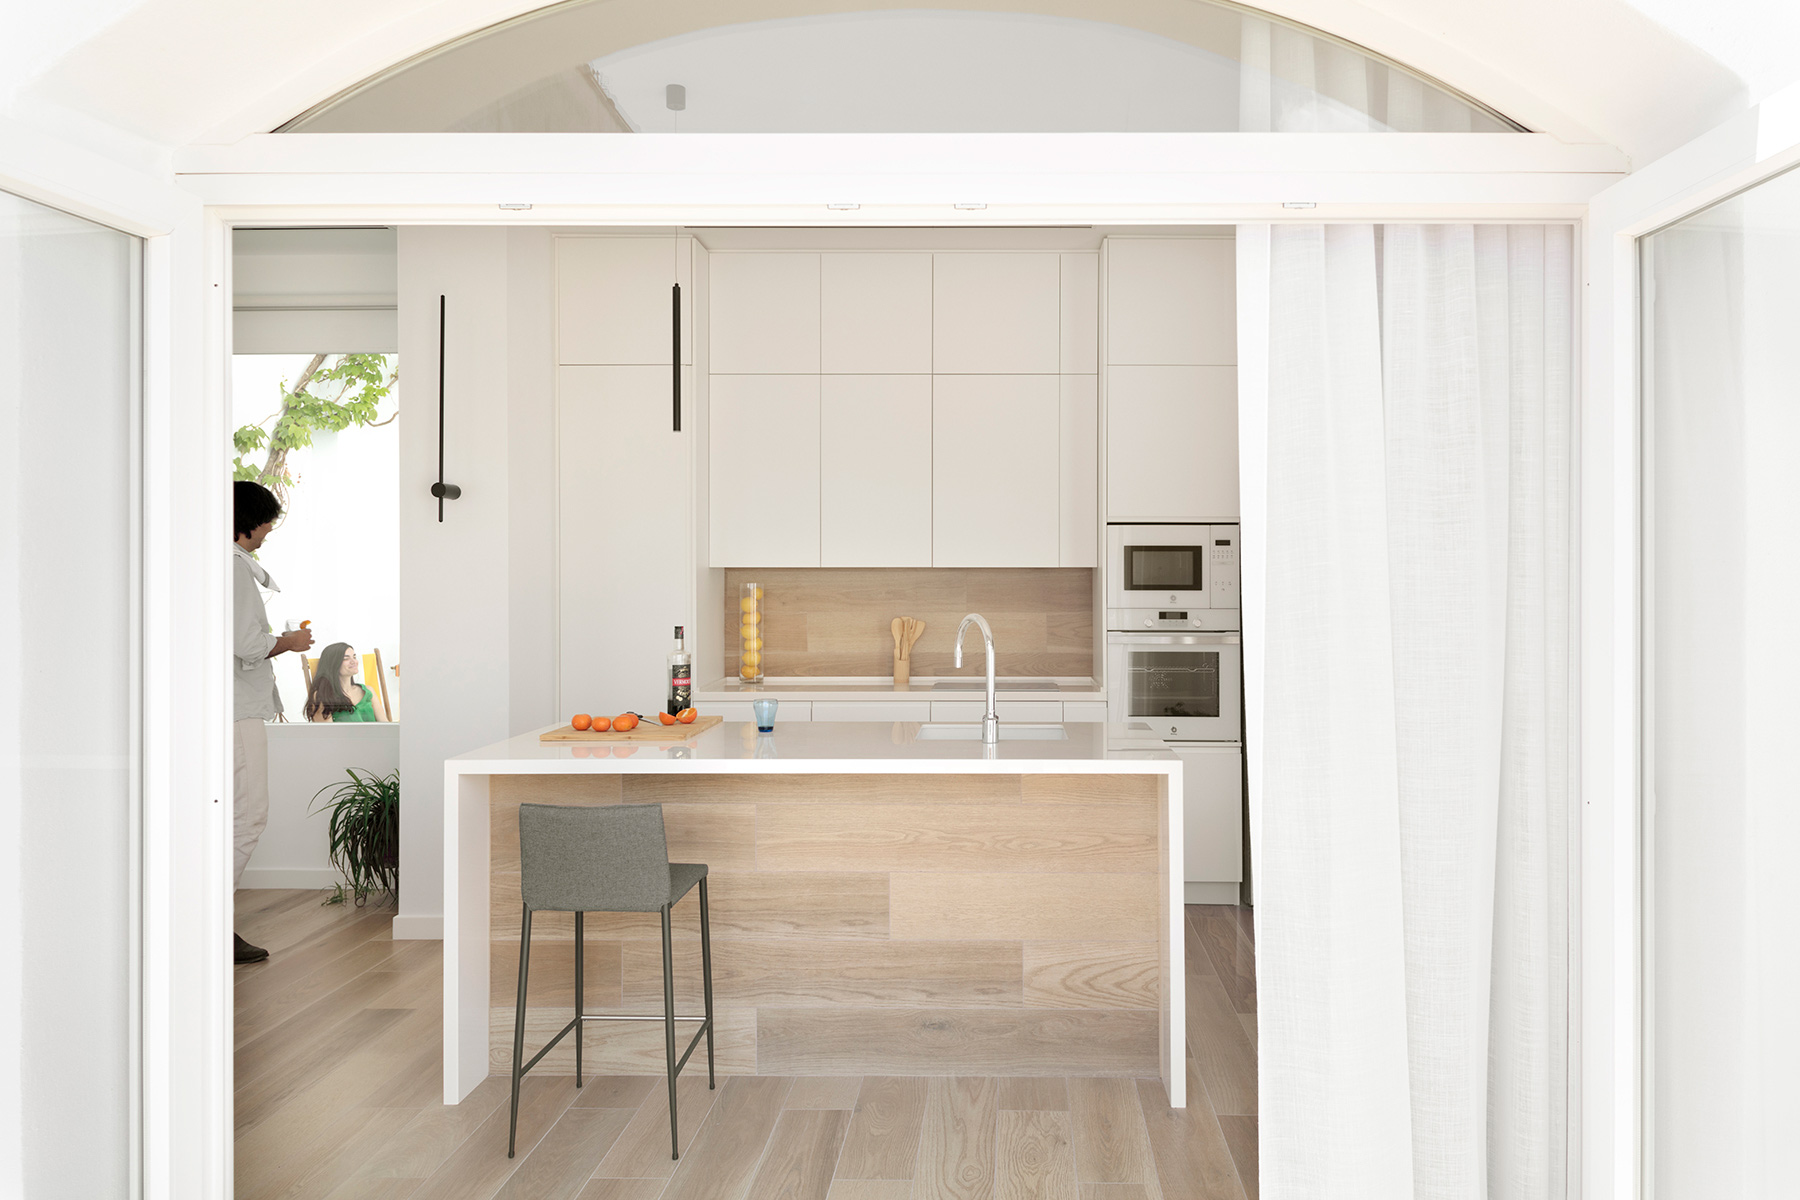 Image of Entrepatios 5 in Dekton Kira is the star of the kitchen in this Madrid flat that redefines the concept of luxury - Cosentino